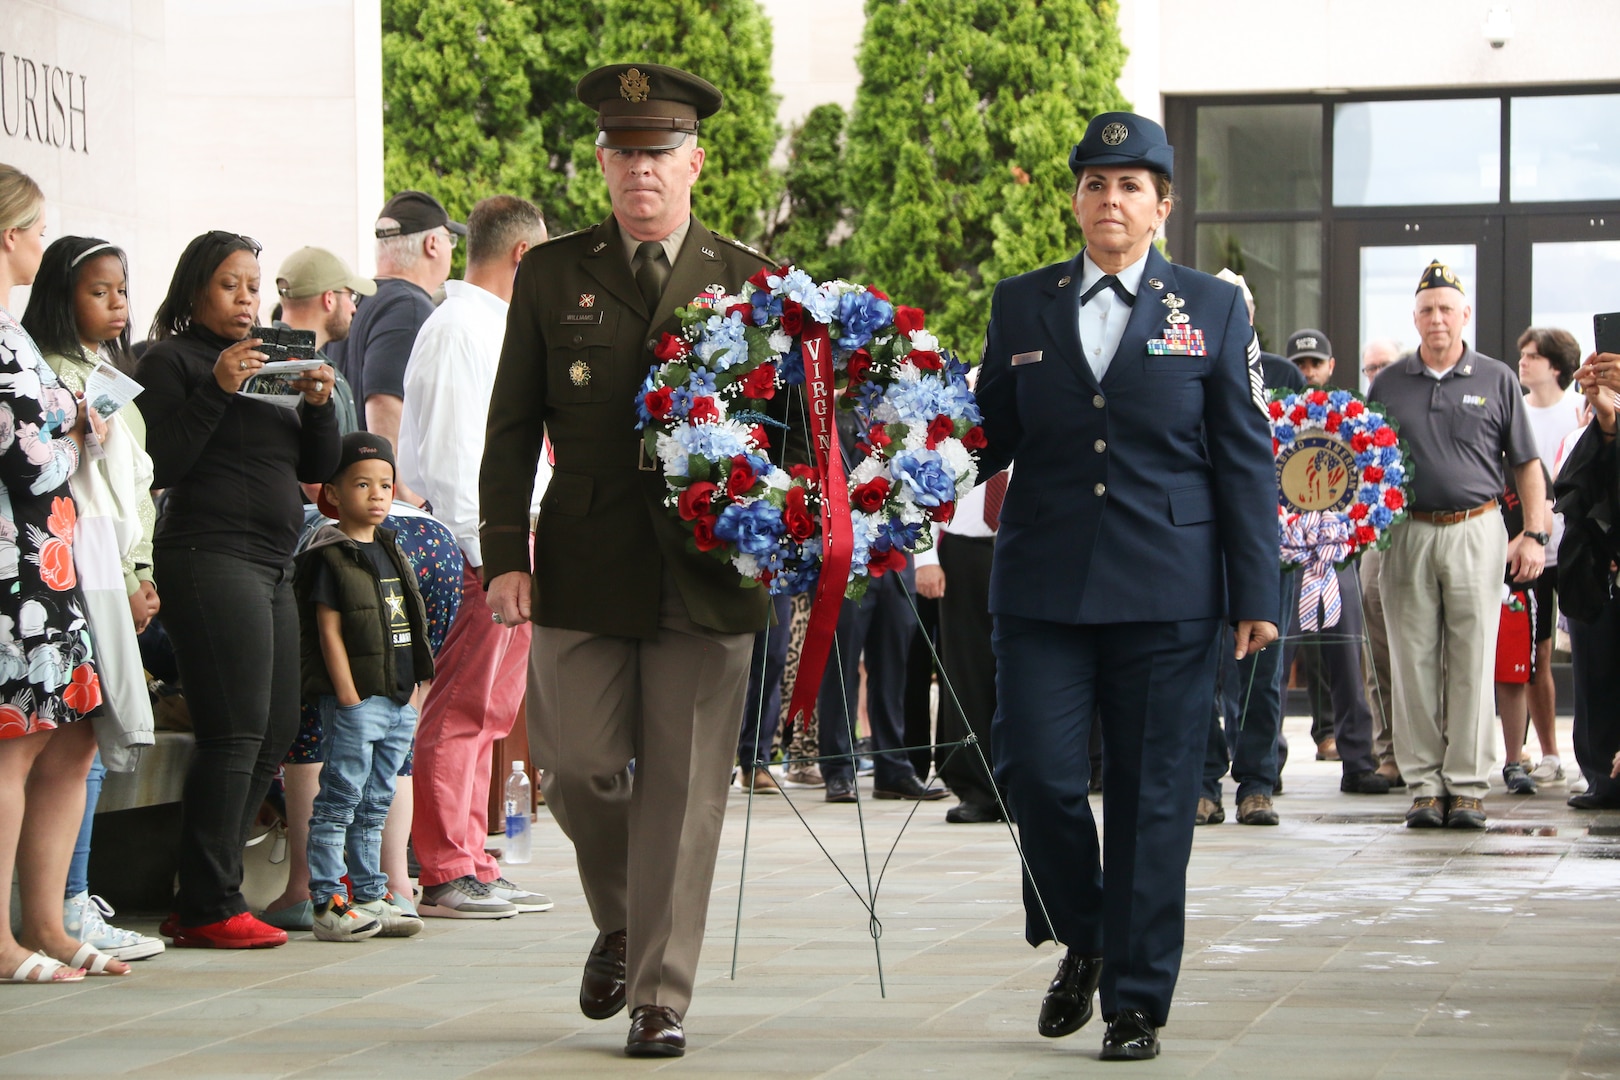 Fallen service members honored, remembered at Commonwealth’s 67th Annual Memorial Day Ceremony